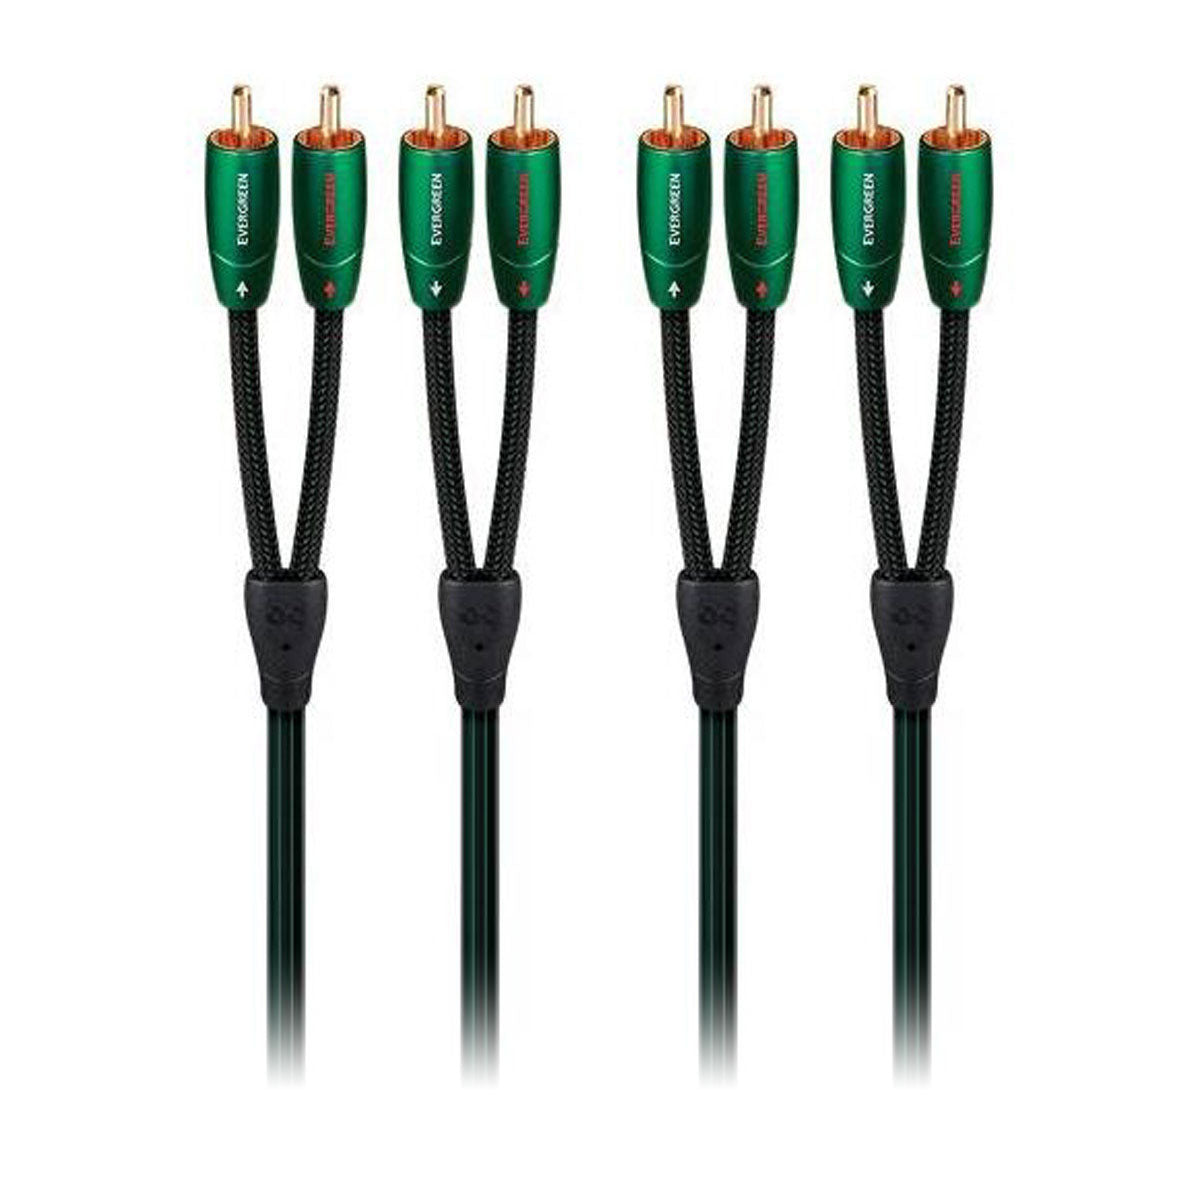 AudioQuest Evergreen 1m (3.28 ft) RCA Male to RCA Male Cable - Pair